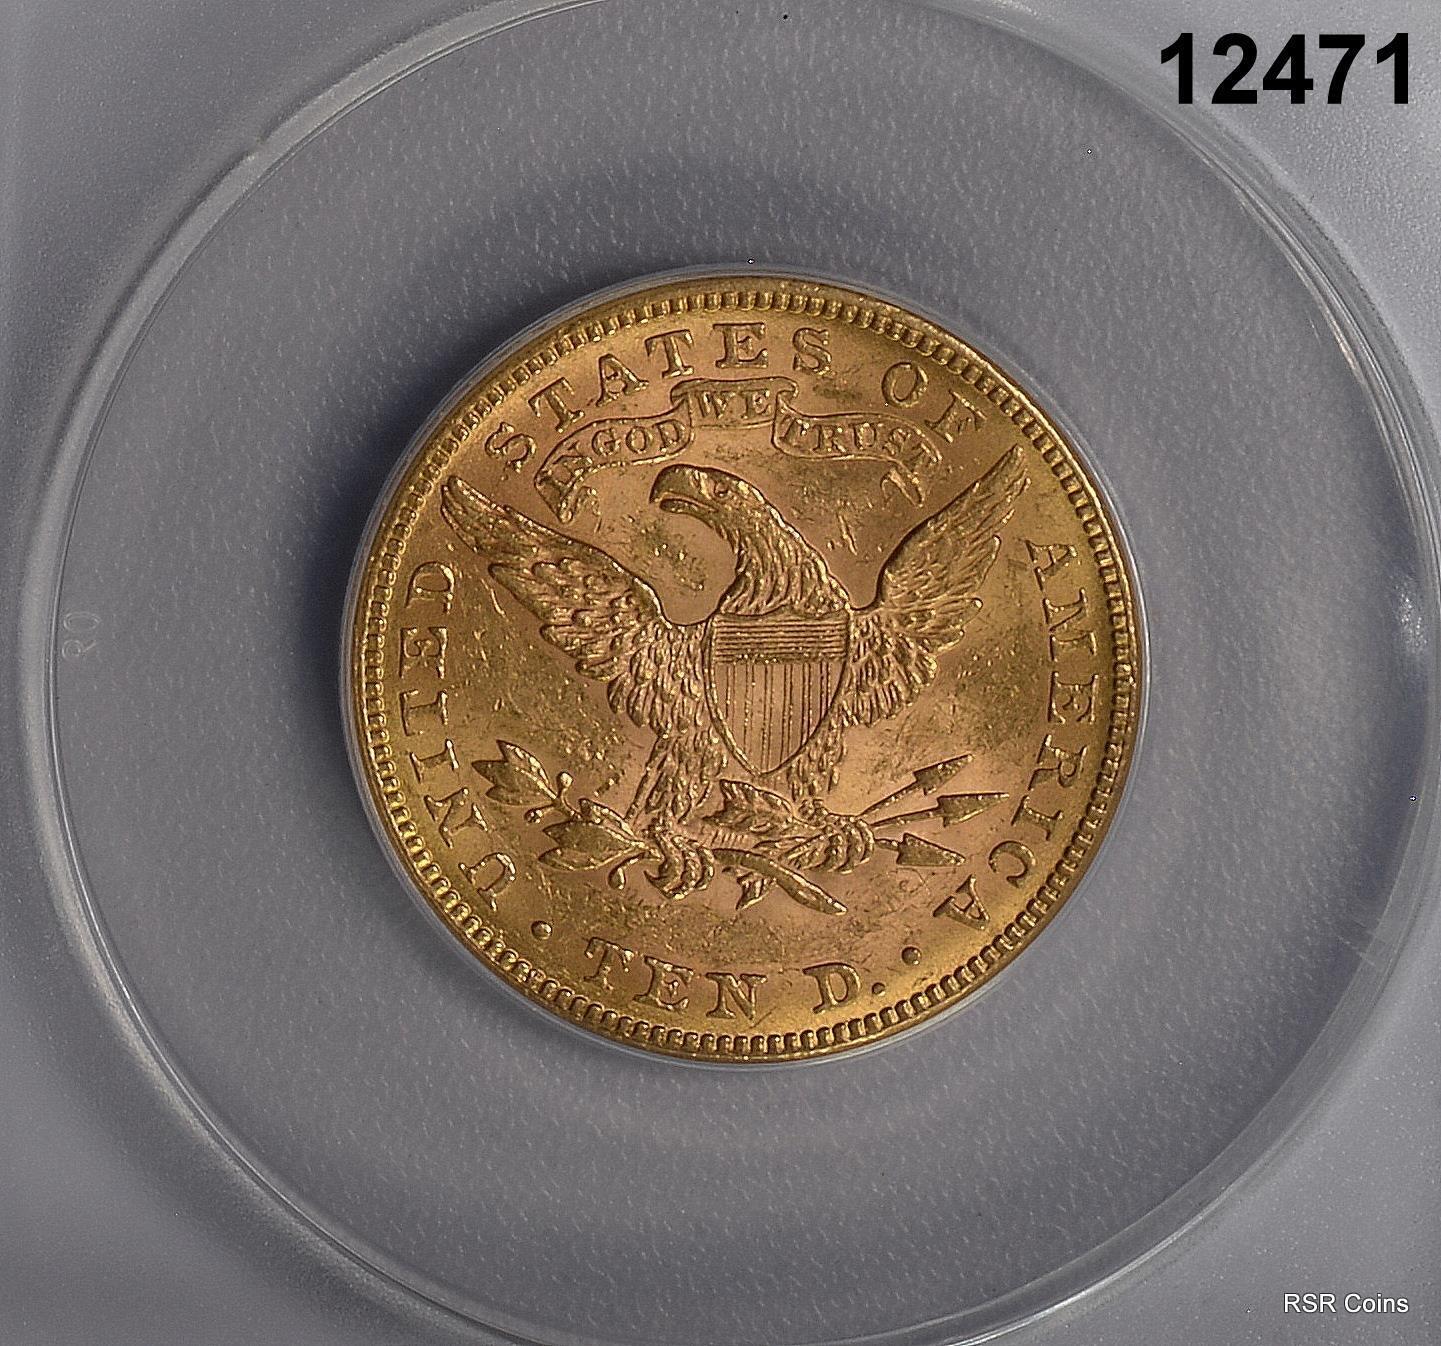 1882 $10 GOLD EAGLE LIBERTY ANACS CERTIFIED AU55 FROSTY! #12471